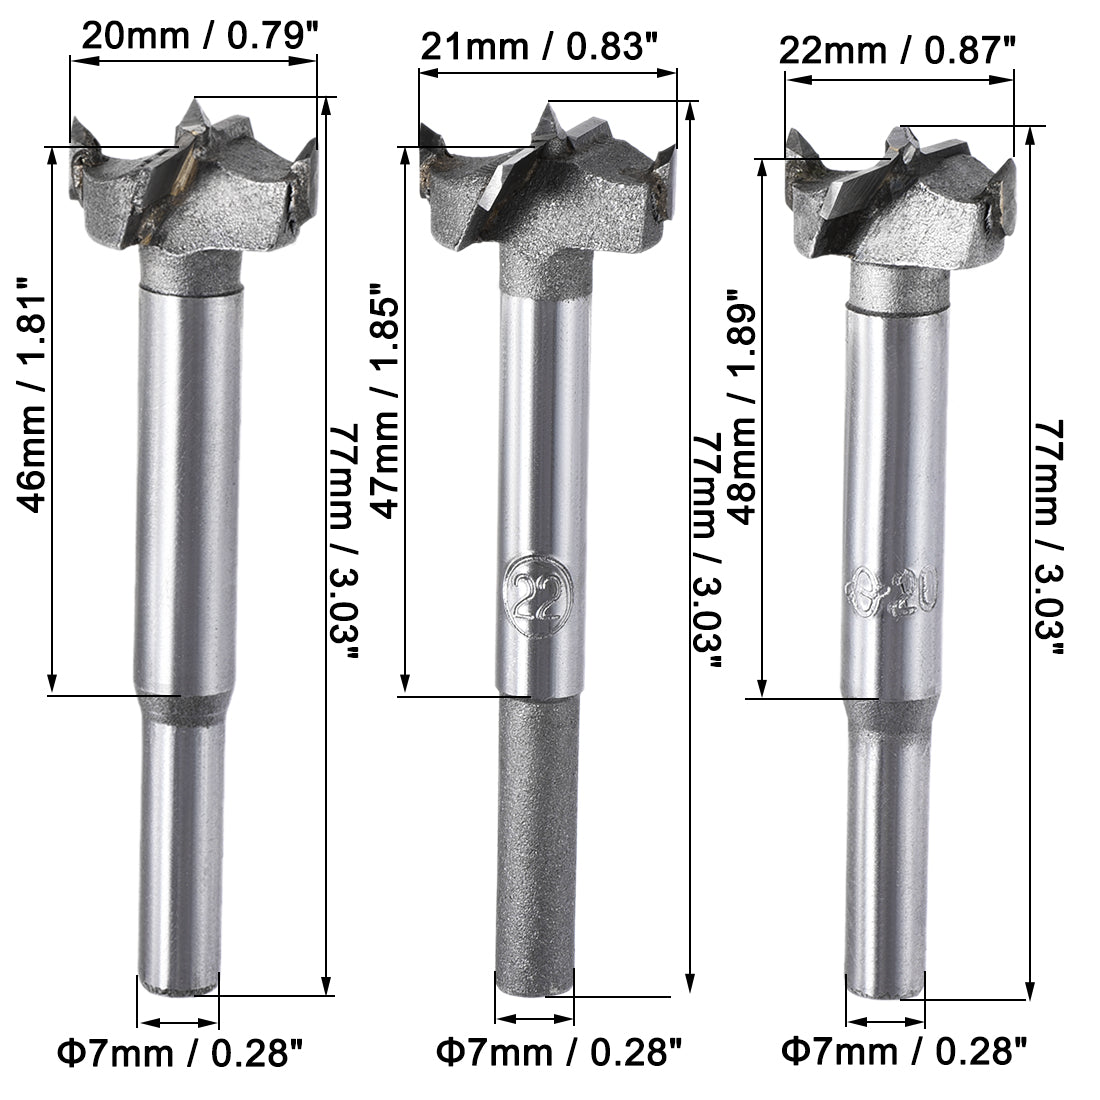 Uxcell Uxcell Forstner Wood Boring Drill Bits 18mm 19mm 20mm Dia. Hole Saw Carbide Alloy Steel Tip Round Shank Cutting for Hinge Plywood Wood Tool 3in1 Set